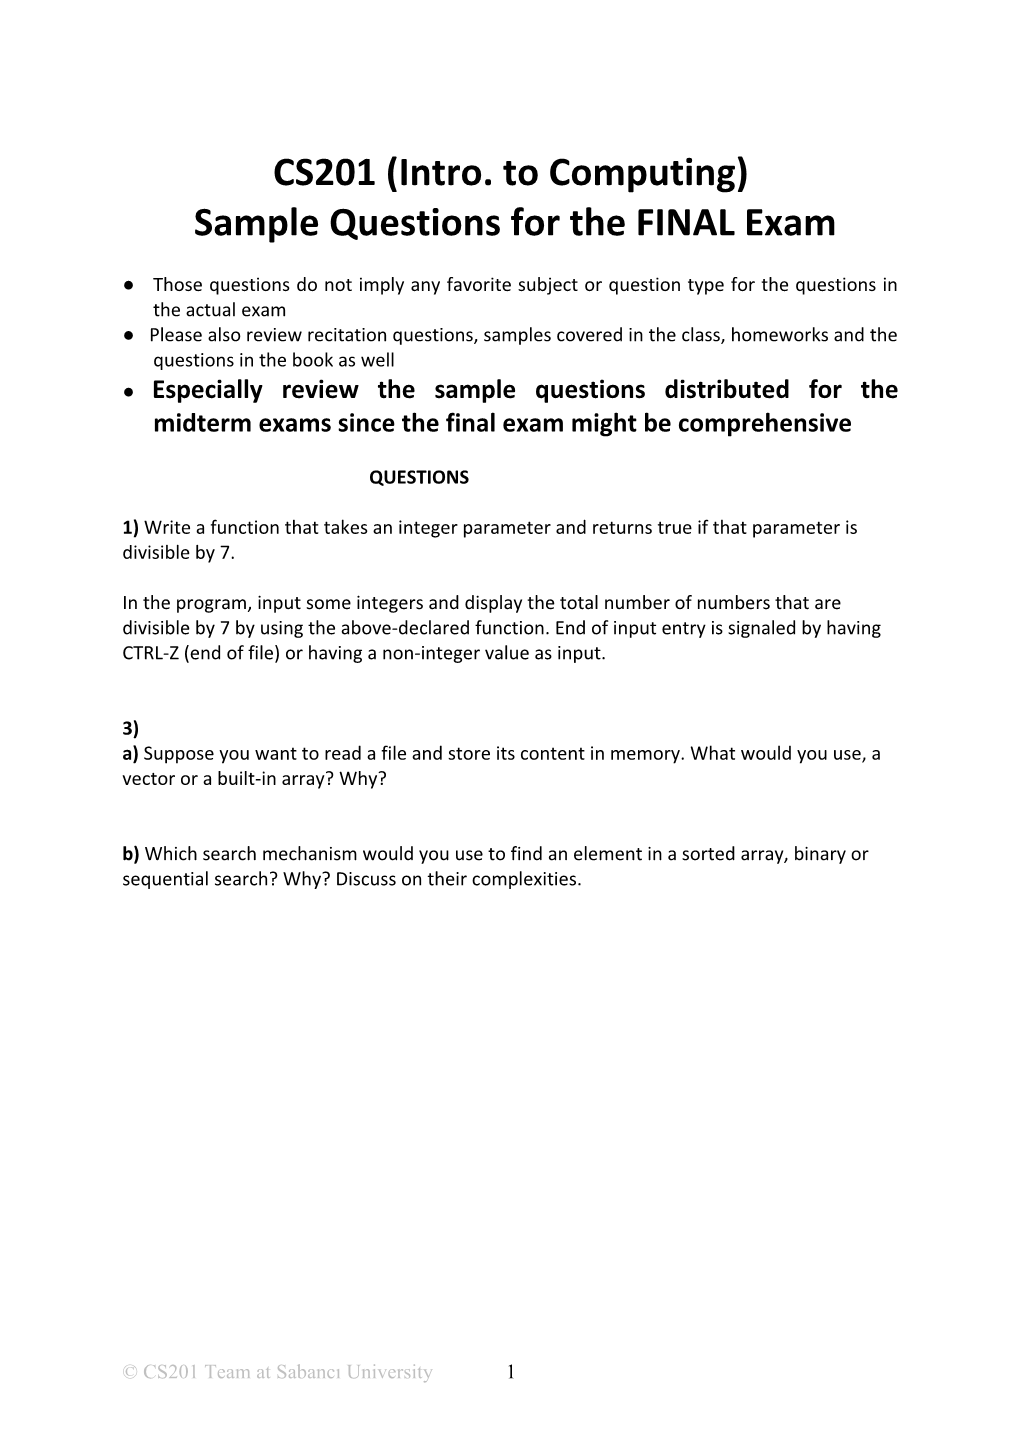 Sample Questions for the FINAL Exam